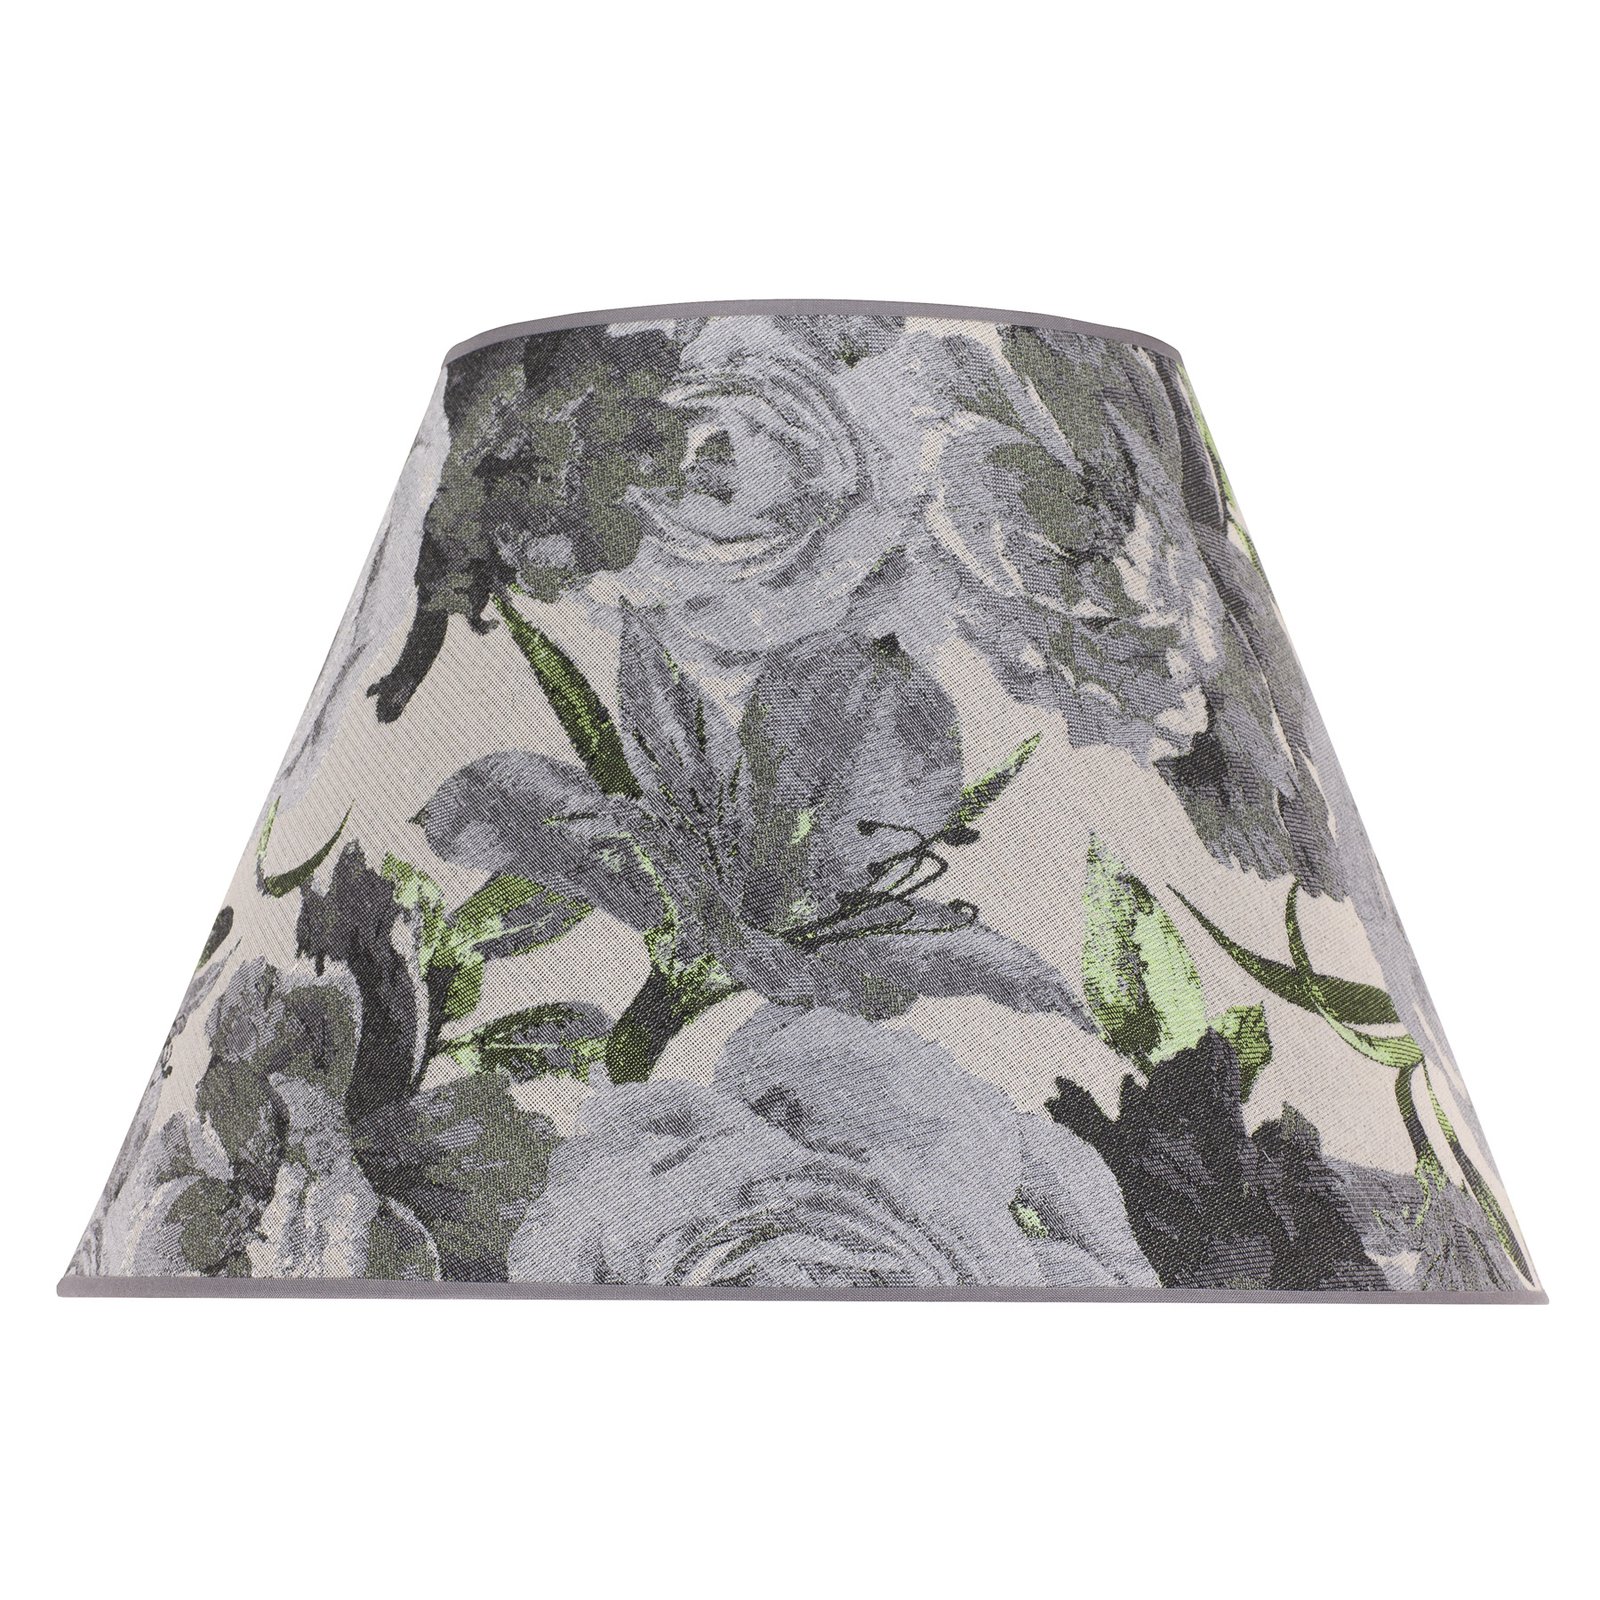 Sofia lampshade height 26 cm, floral pattern grey